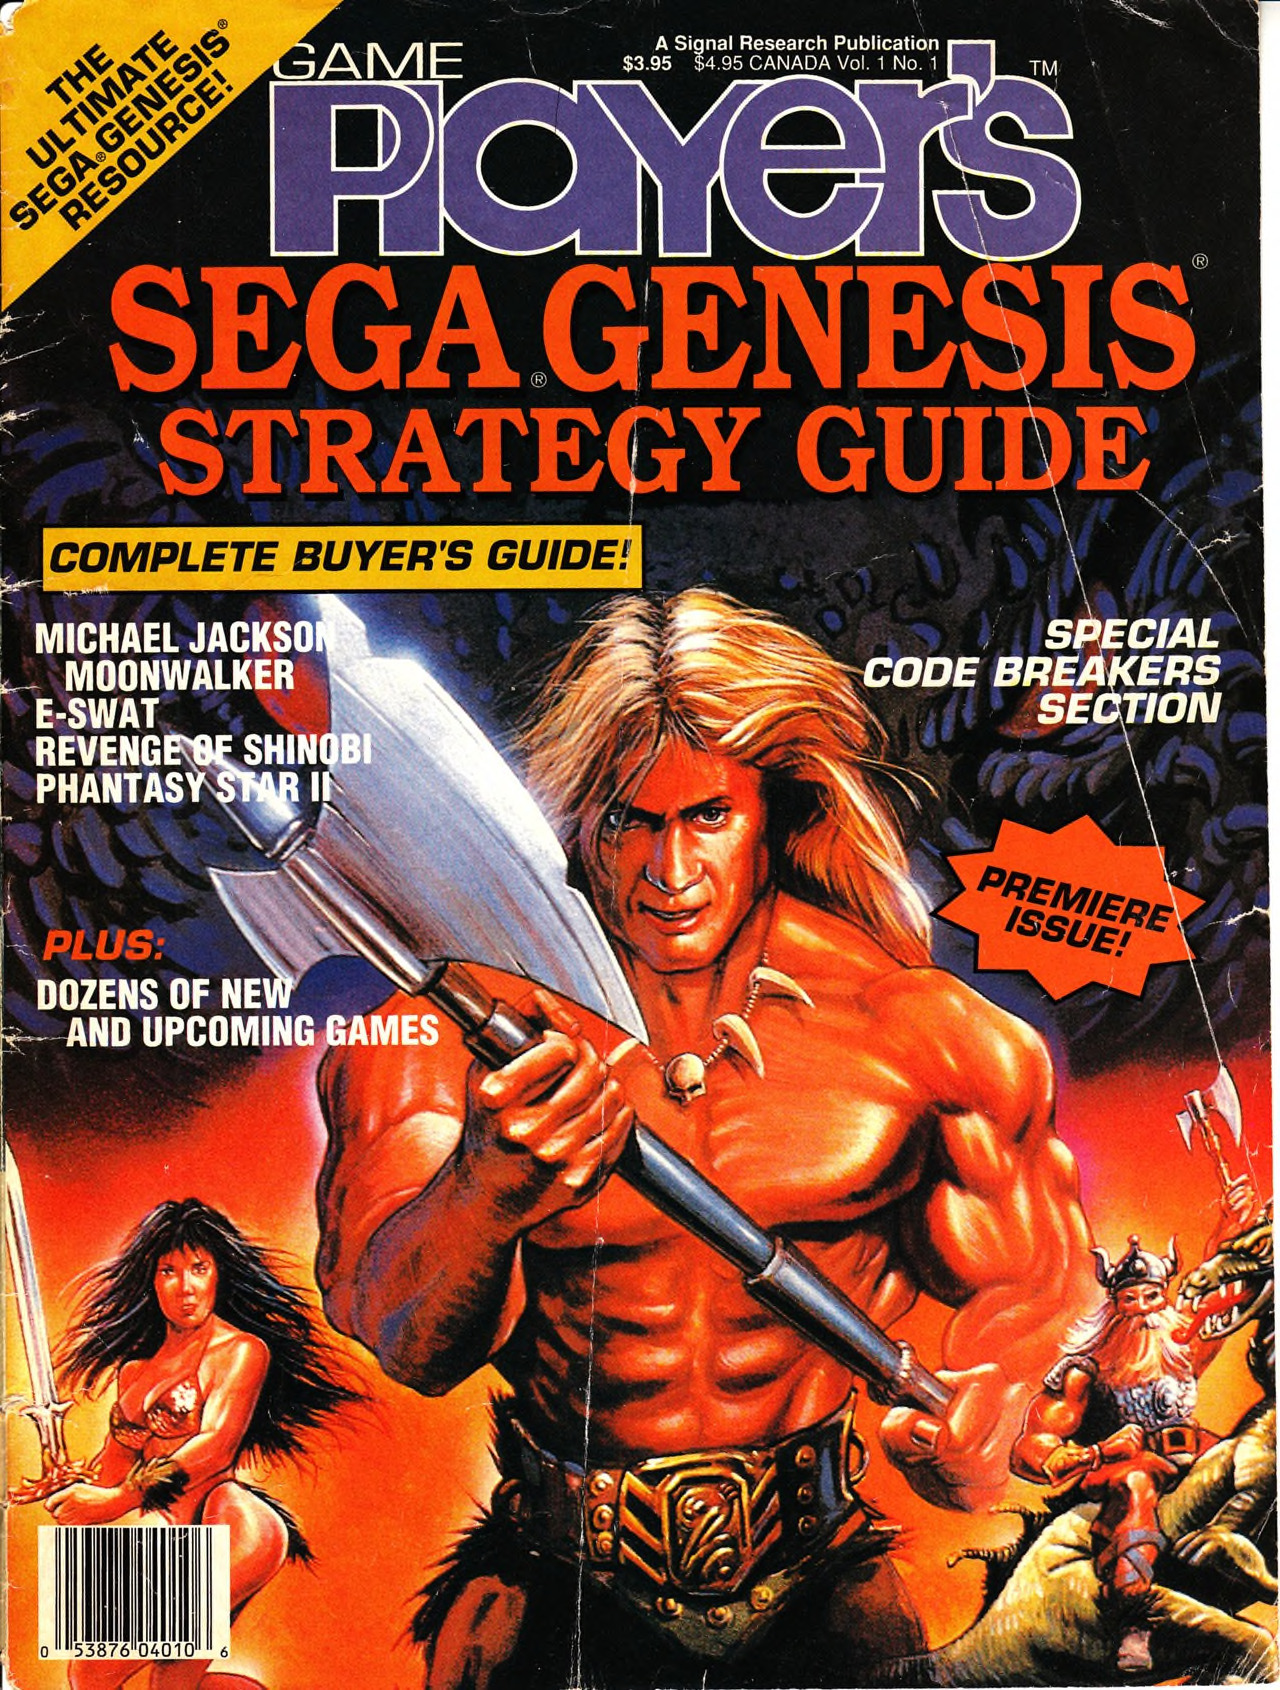 Discovered that one of my all time favorite strategy games is